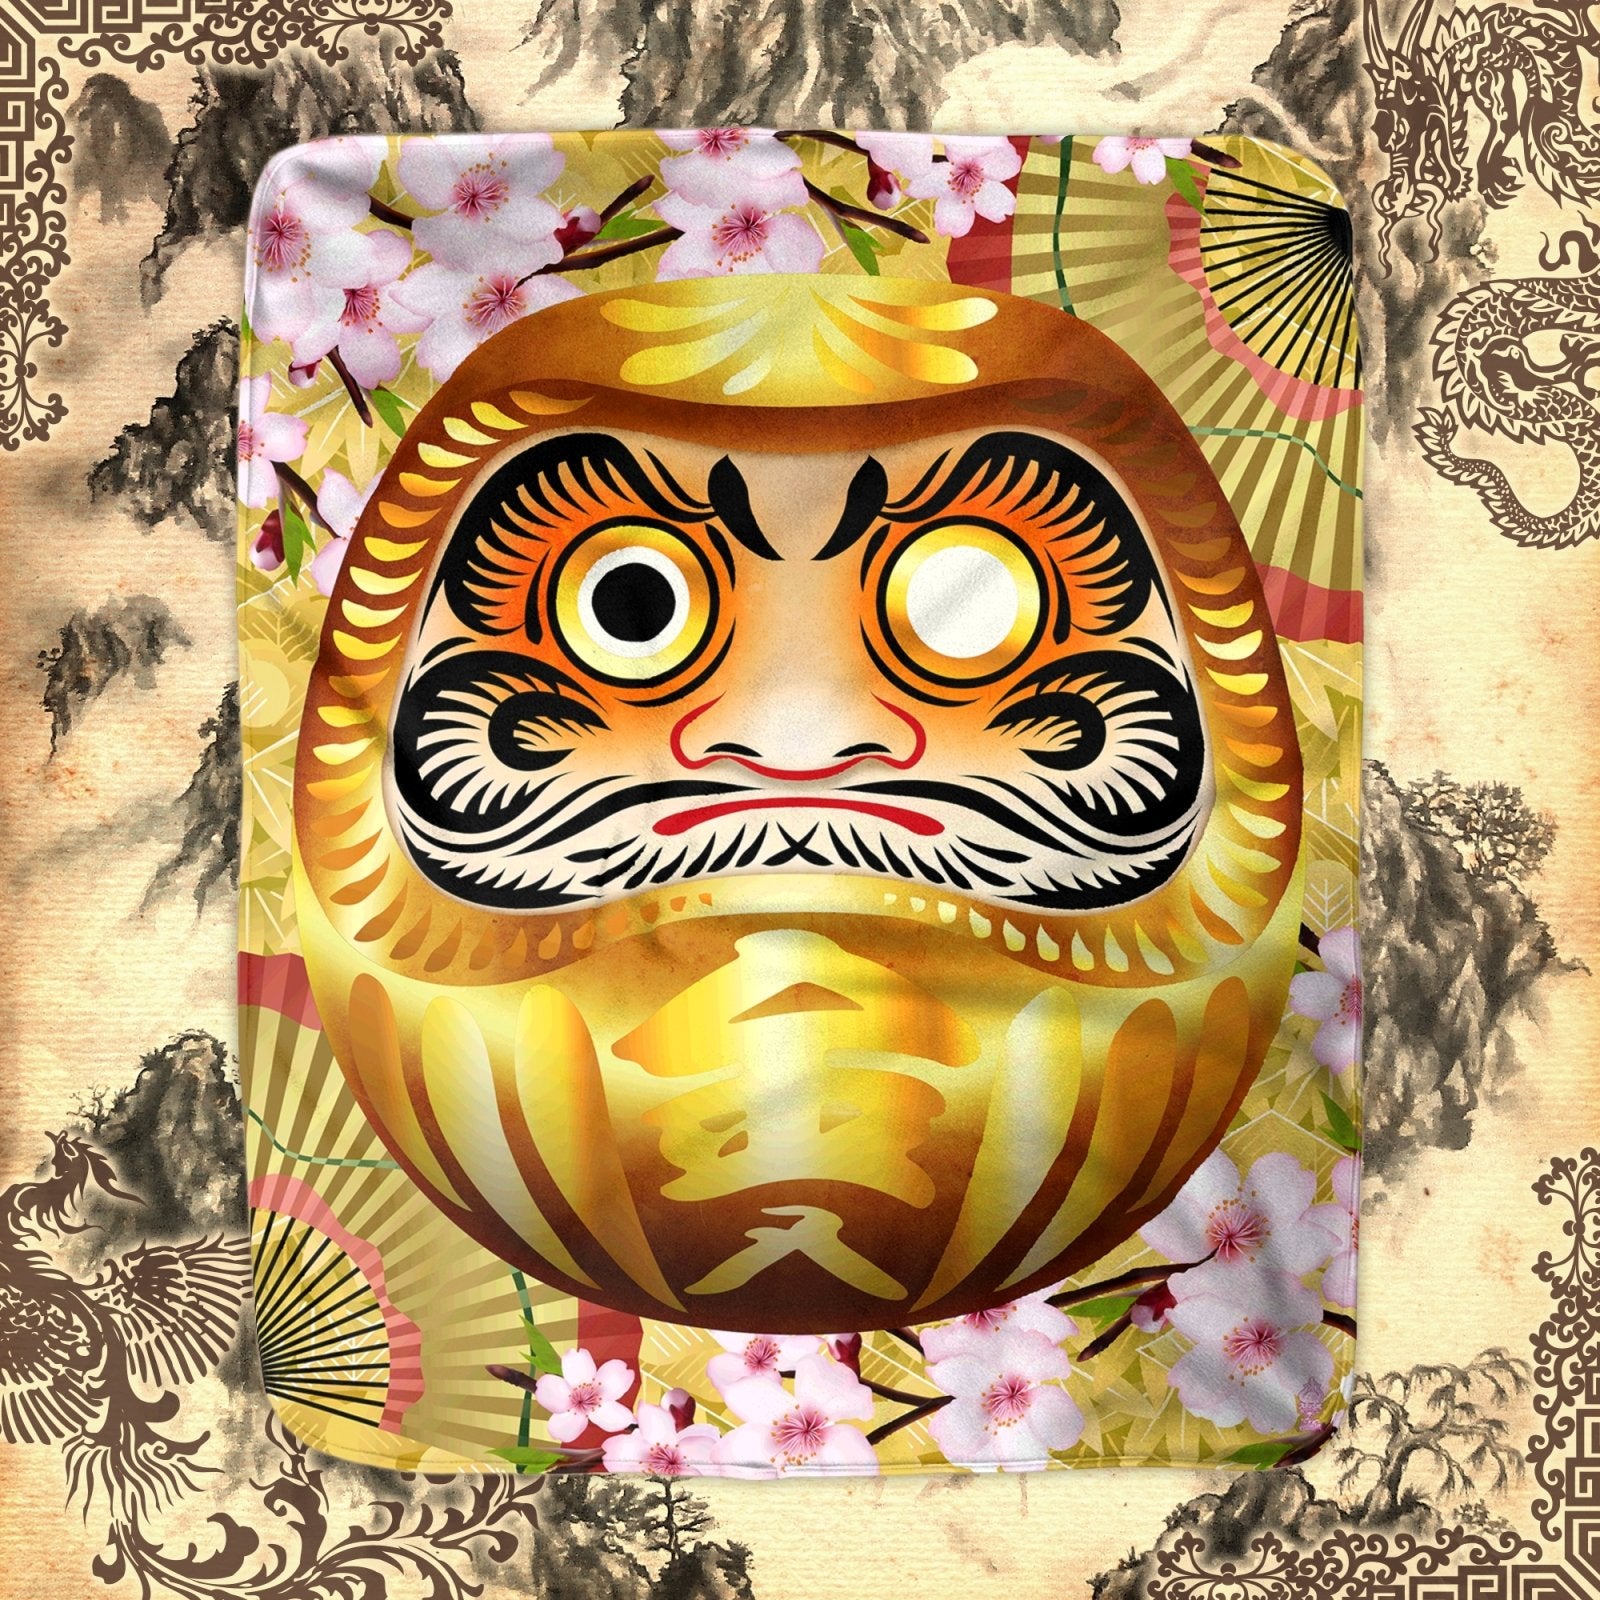 Daruma Throw Fleece Blanket, Japanese Anime and Manga, Indie and Ecclectic Decor, Eclectic and Funky Gift - Gold - Abysm Internal